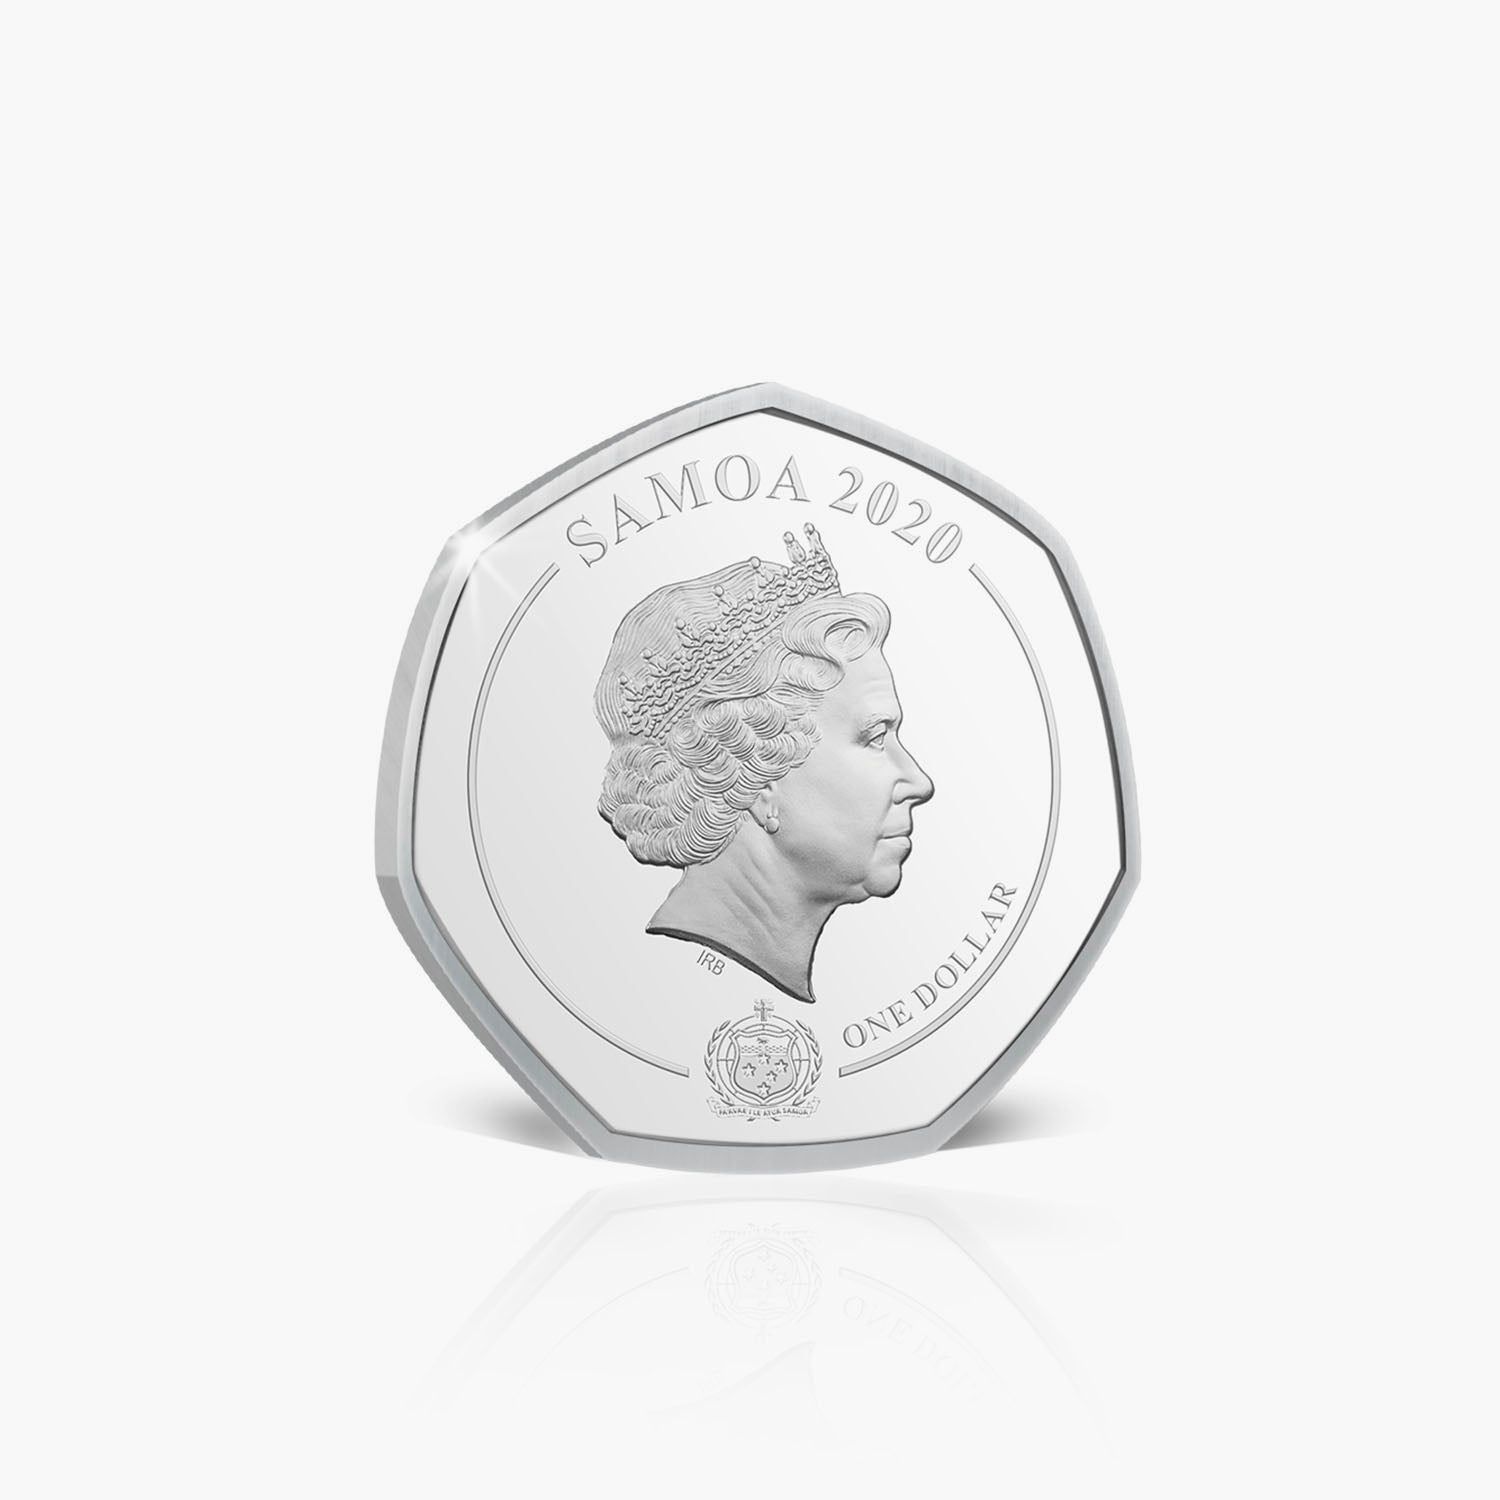 2020 Covid-19 Key Workers Solid Silver Coin